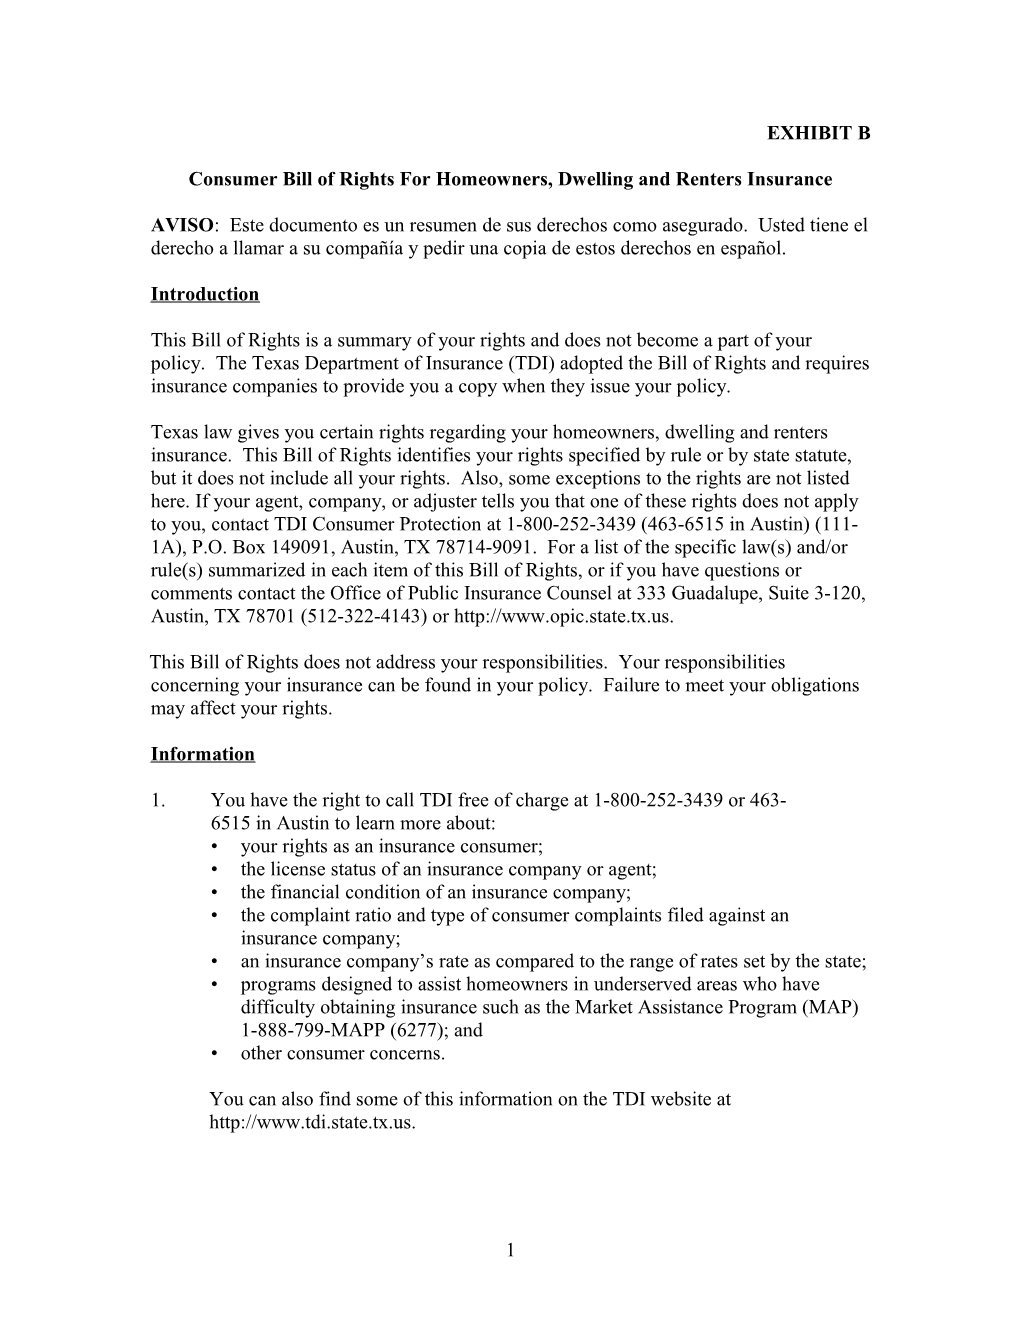 Consumer Bill of Rights for Homeowners, Dwelling and Renters Insurance